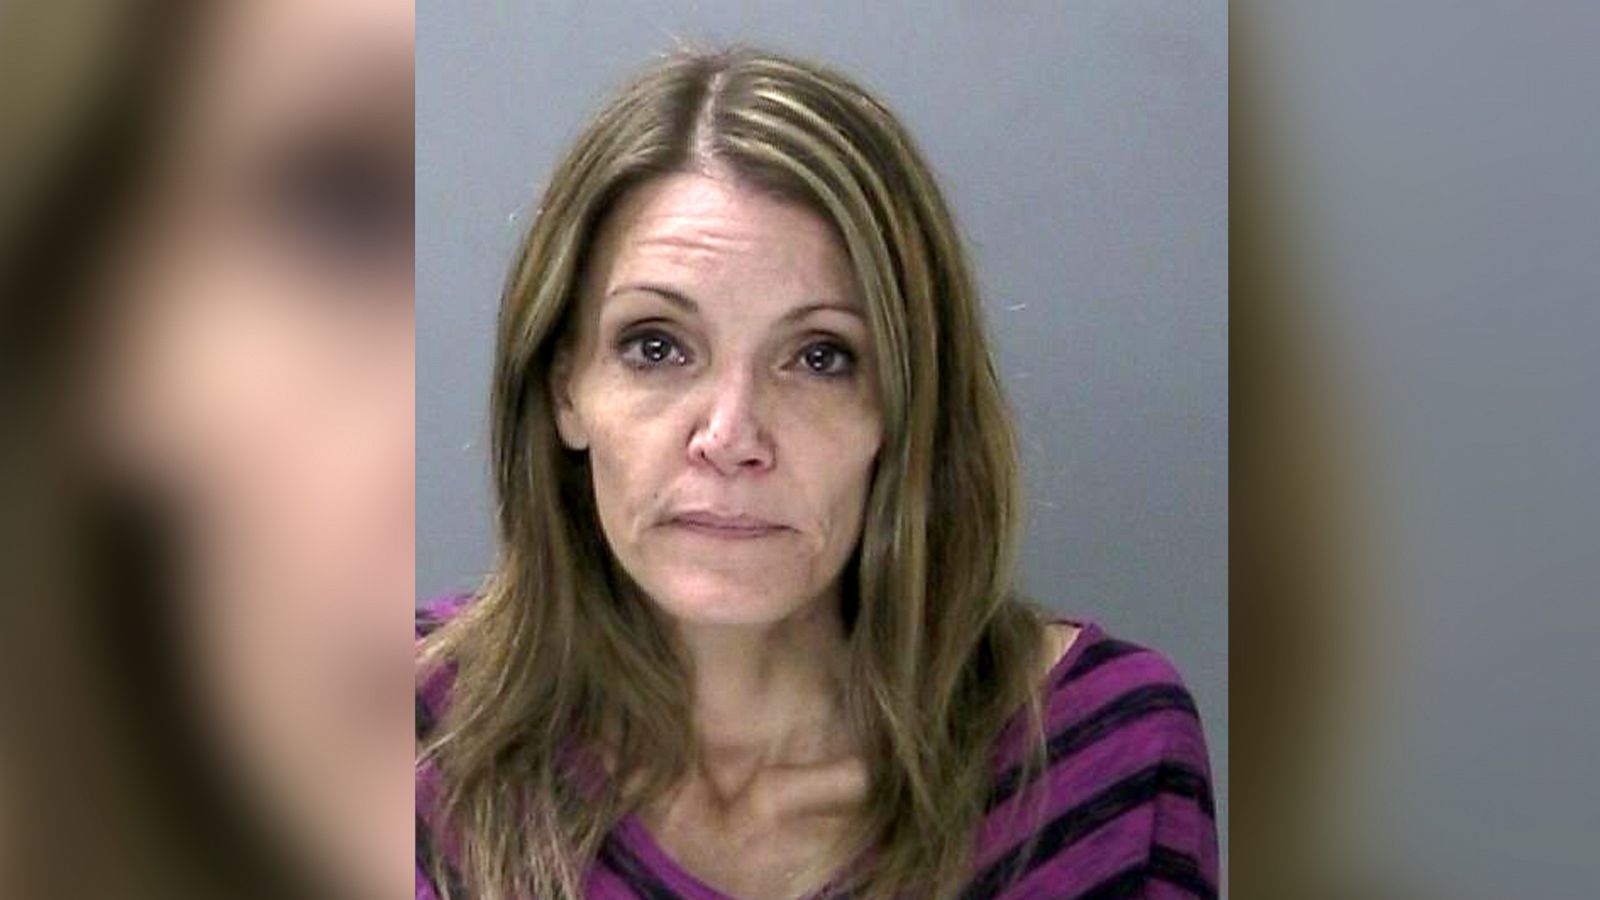 Wife charged with attempted murder for allegedly trying to poison husband with antifreeze